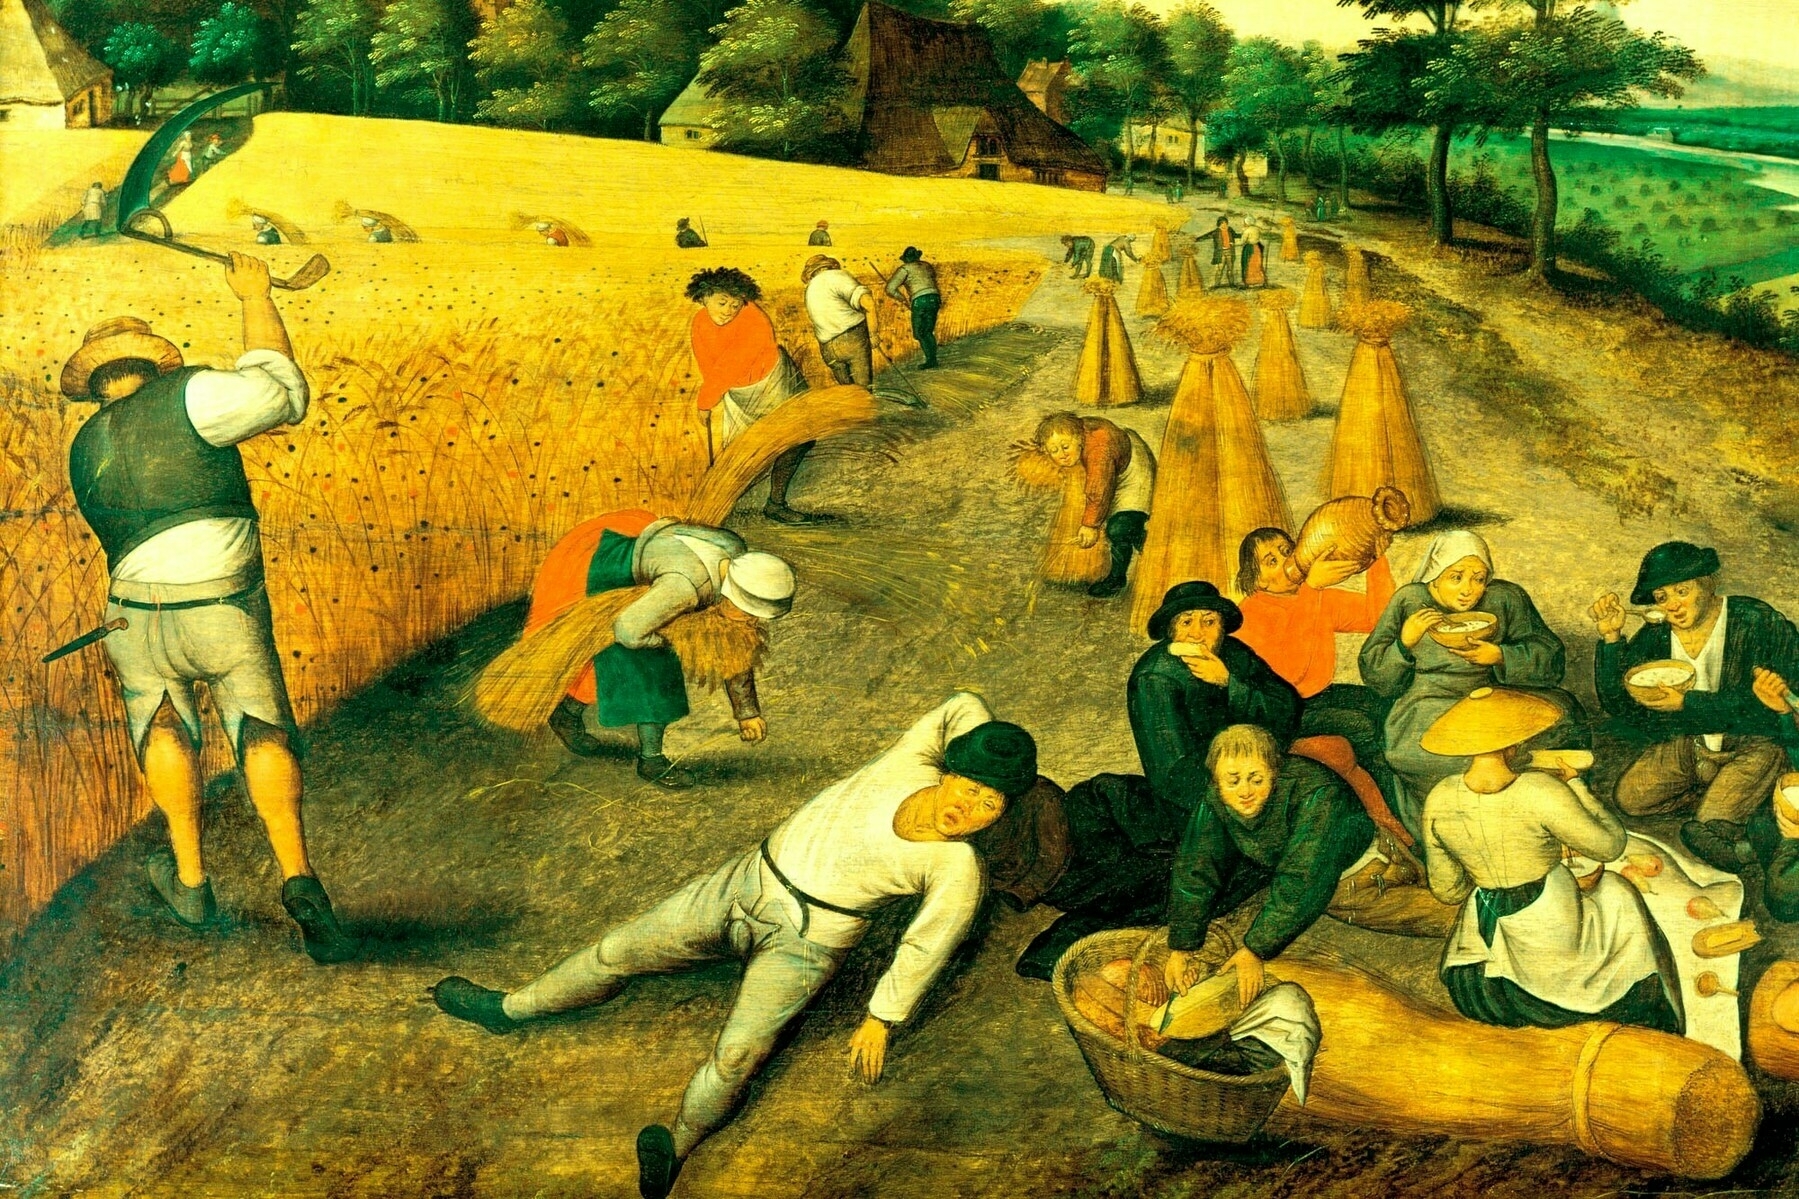 Peasants relaxing in a field / working